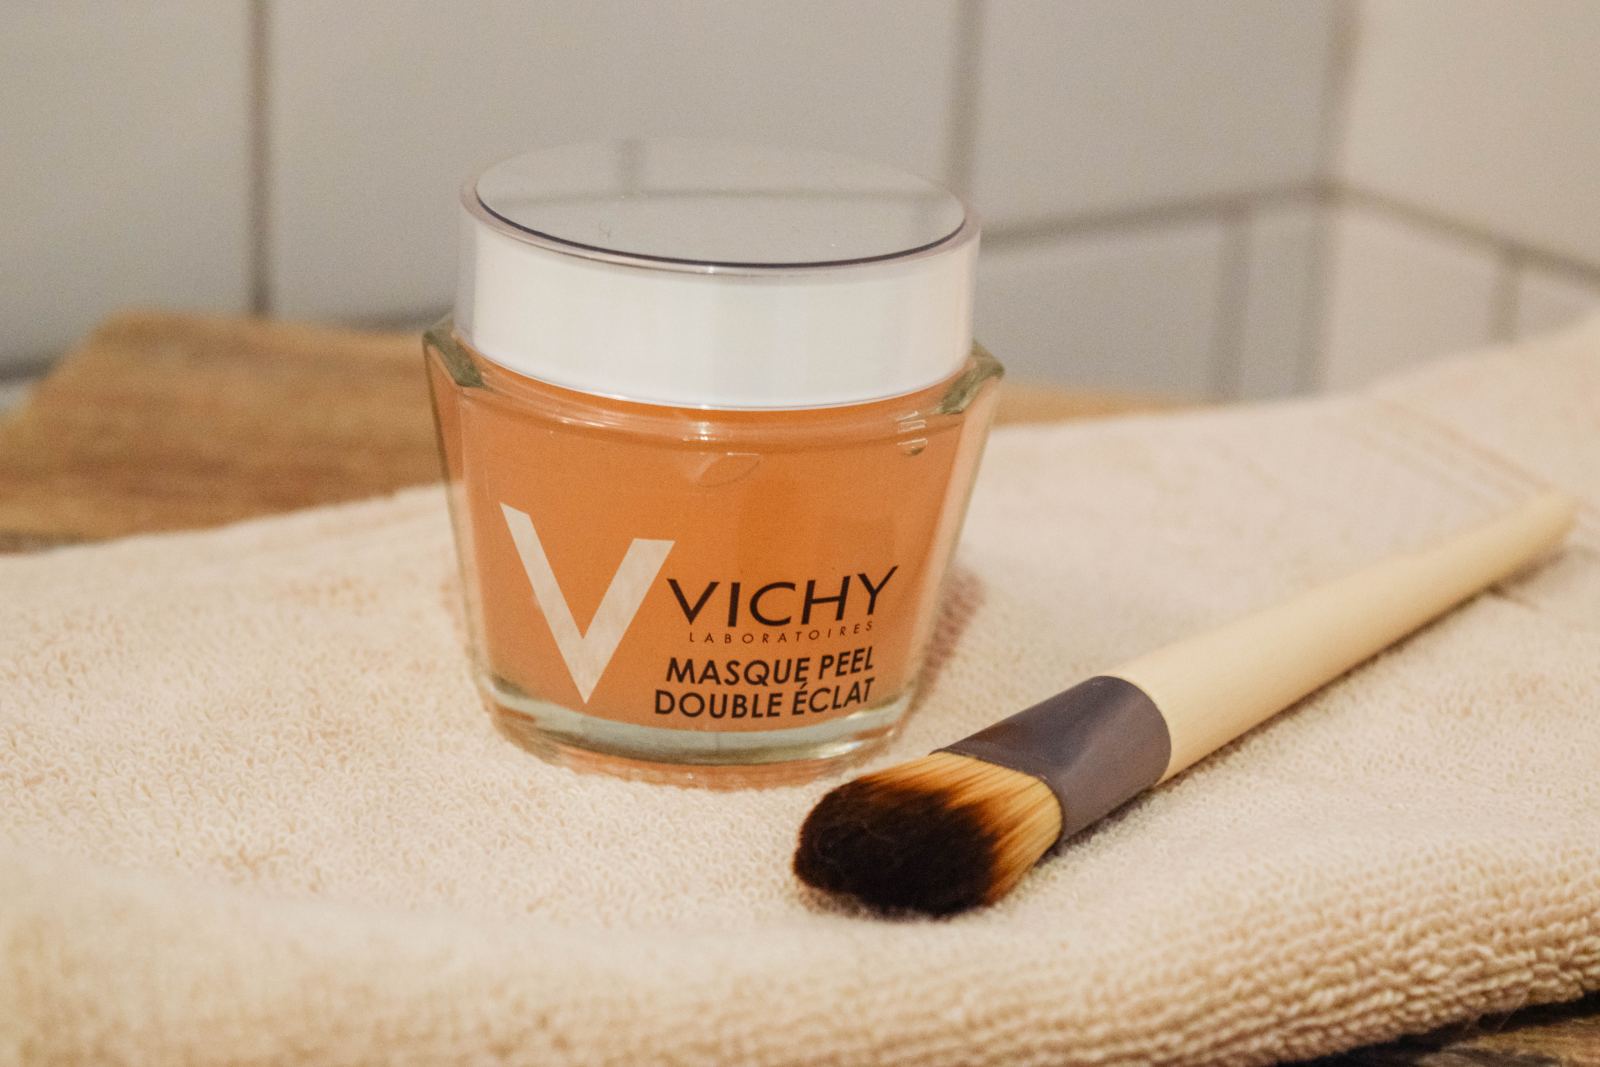 VICHY, VICHY skincare, french skincare, skincare, vichy masque, masque peel double eclat, face mask, vichy face mask, ecotools, ecotools synthetic brush, natural skincare